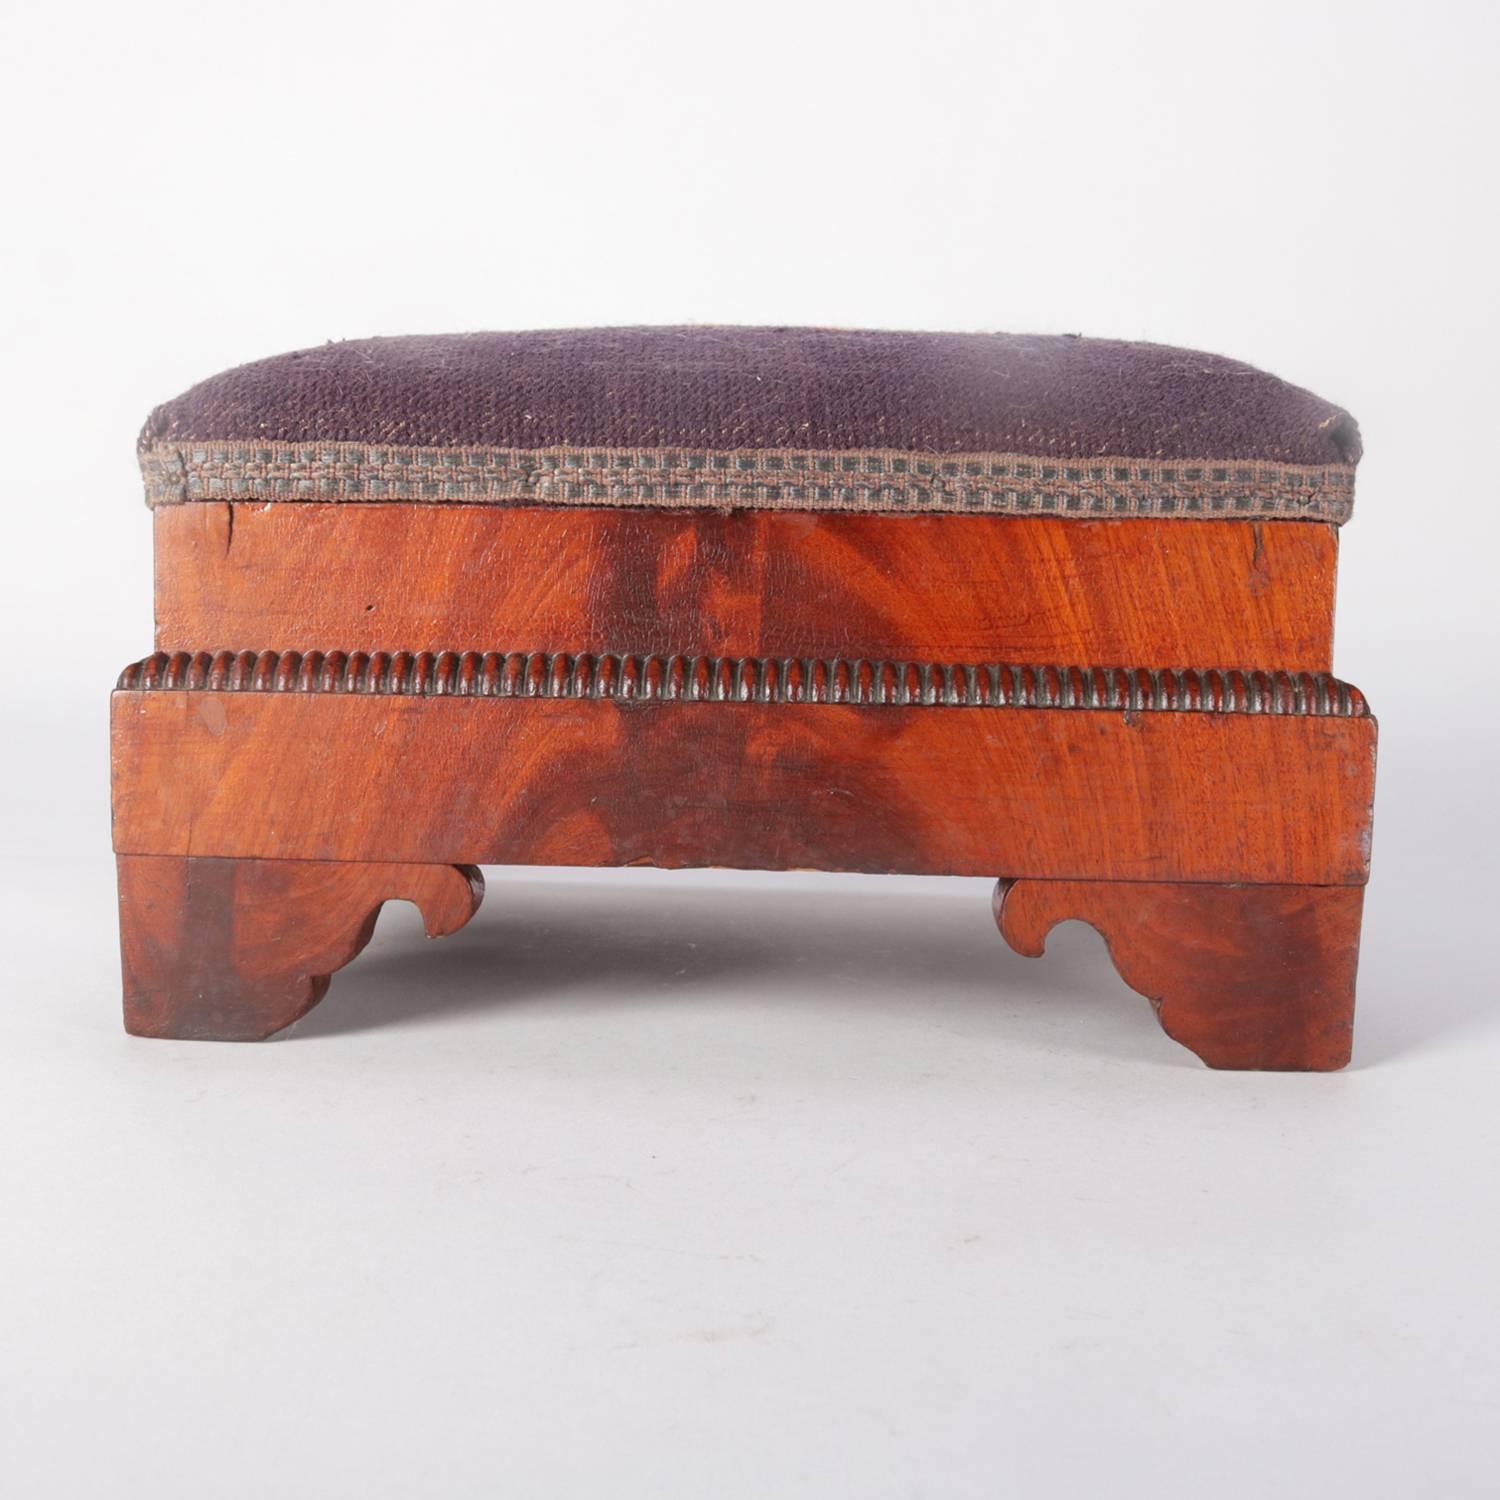 19th Century Antique American Empire Flame Mahogany Floral Needlepoint Foot Stool, circa 1850